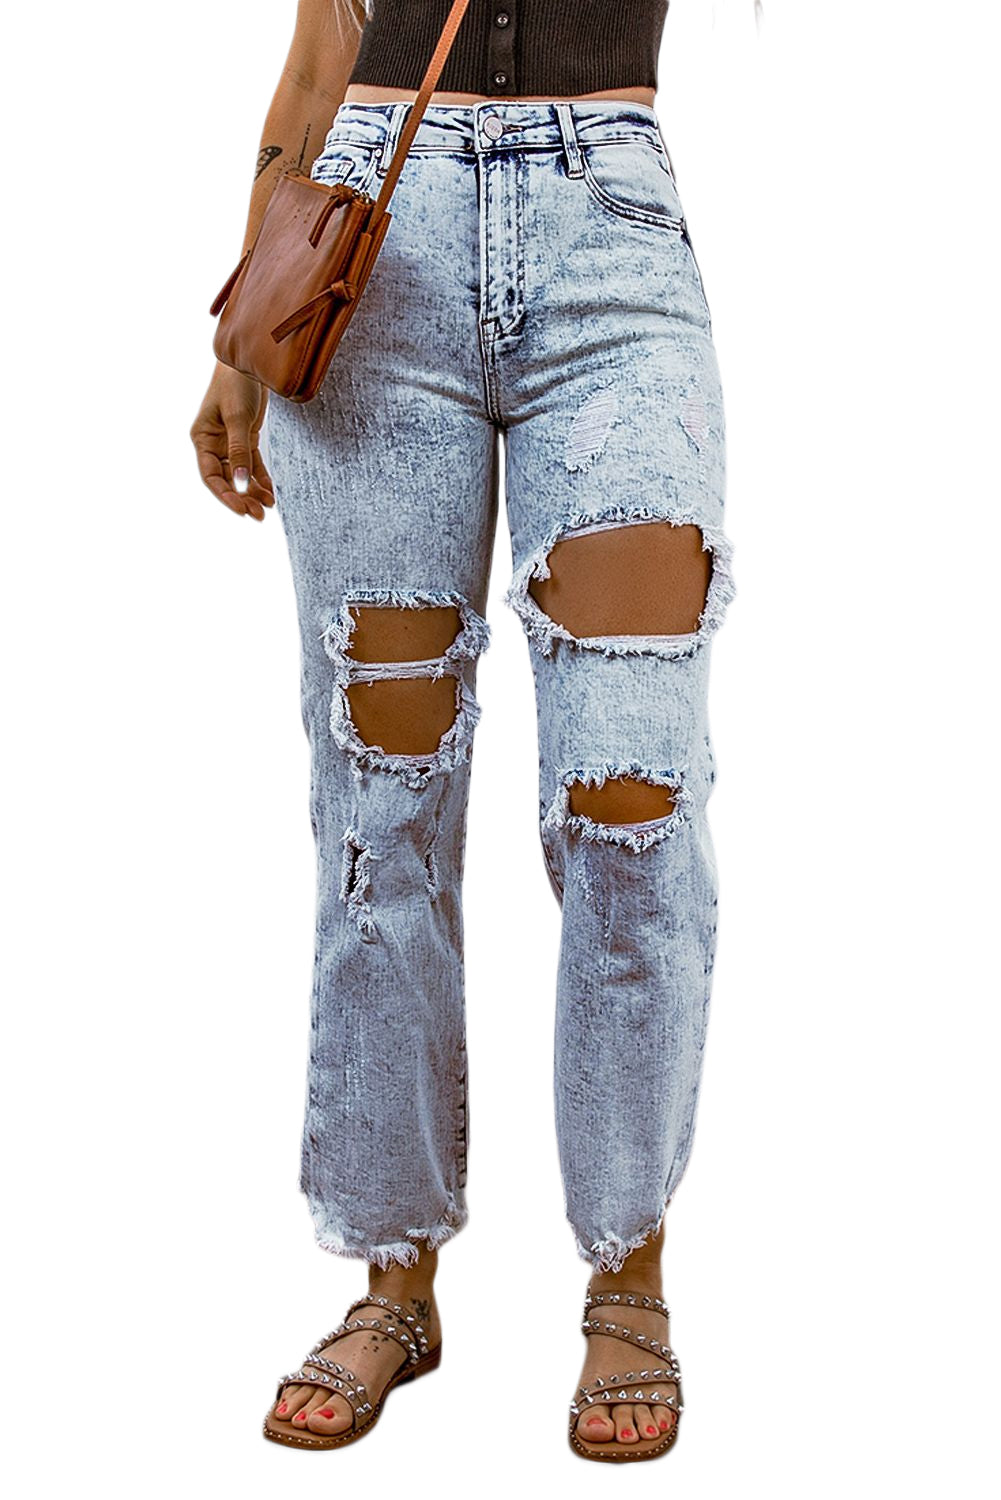 Sky Blue Hollow-out Light Washed Ripped Boyfriend Jeans Jeans JT's Designer Fashion